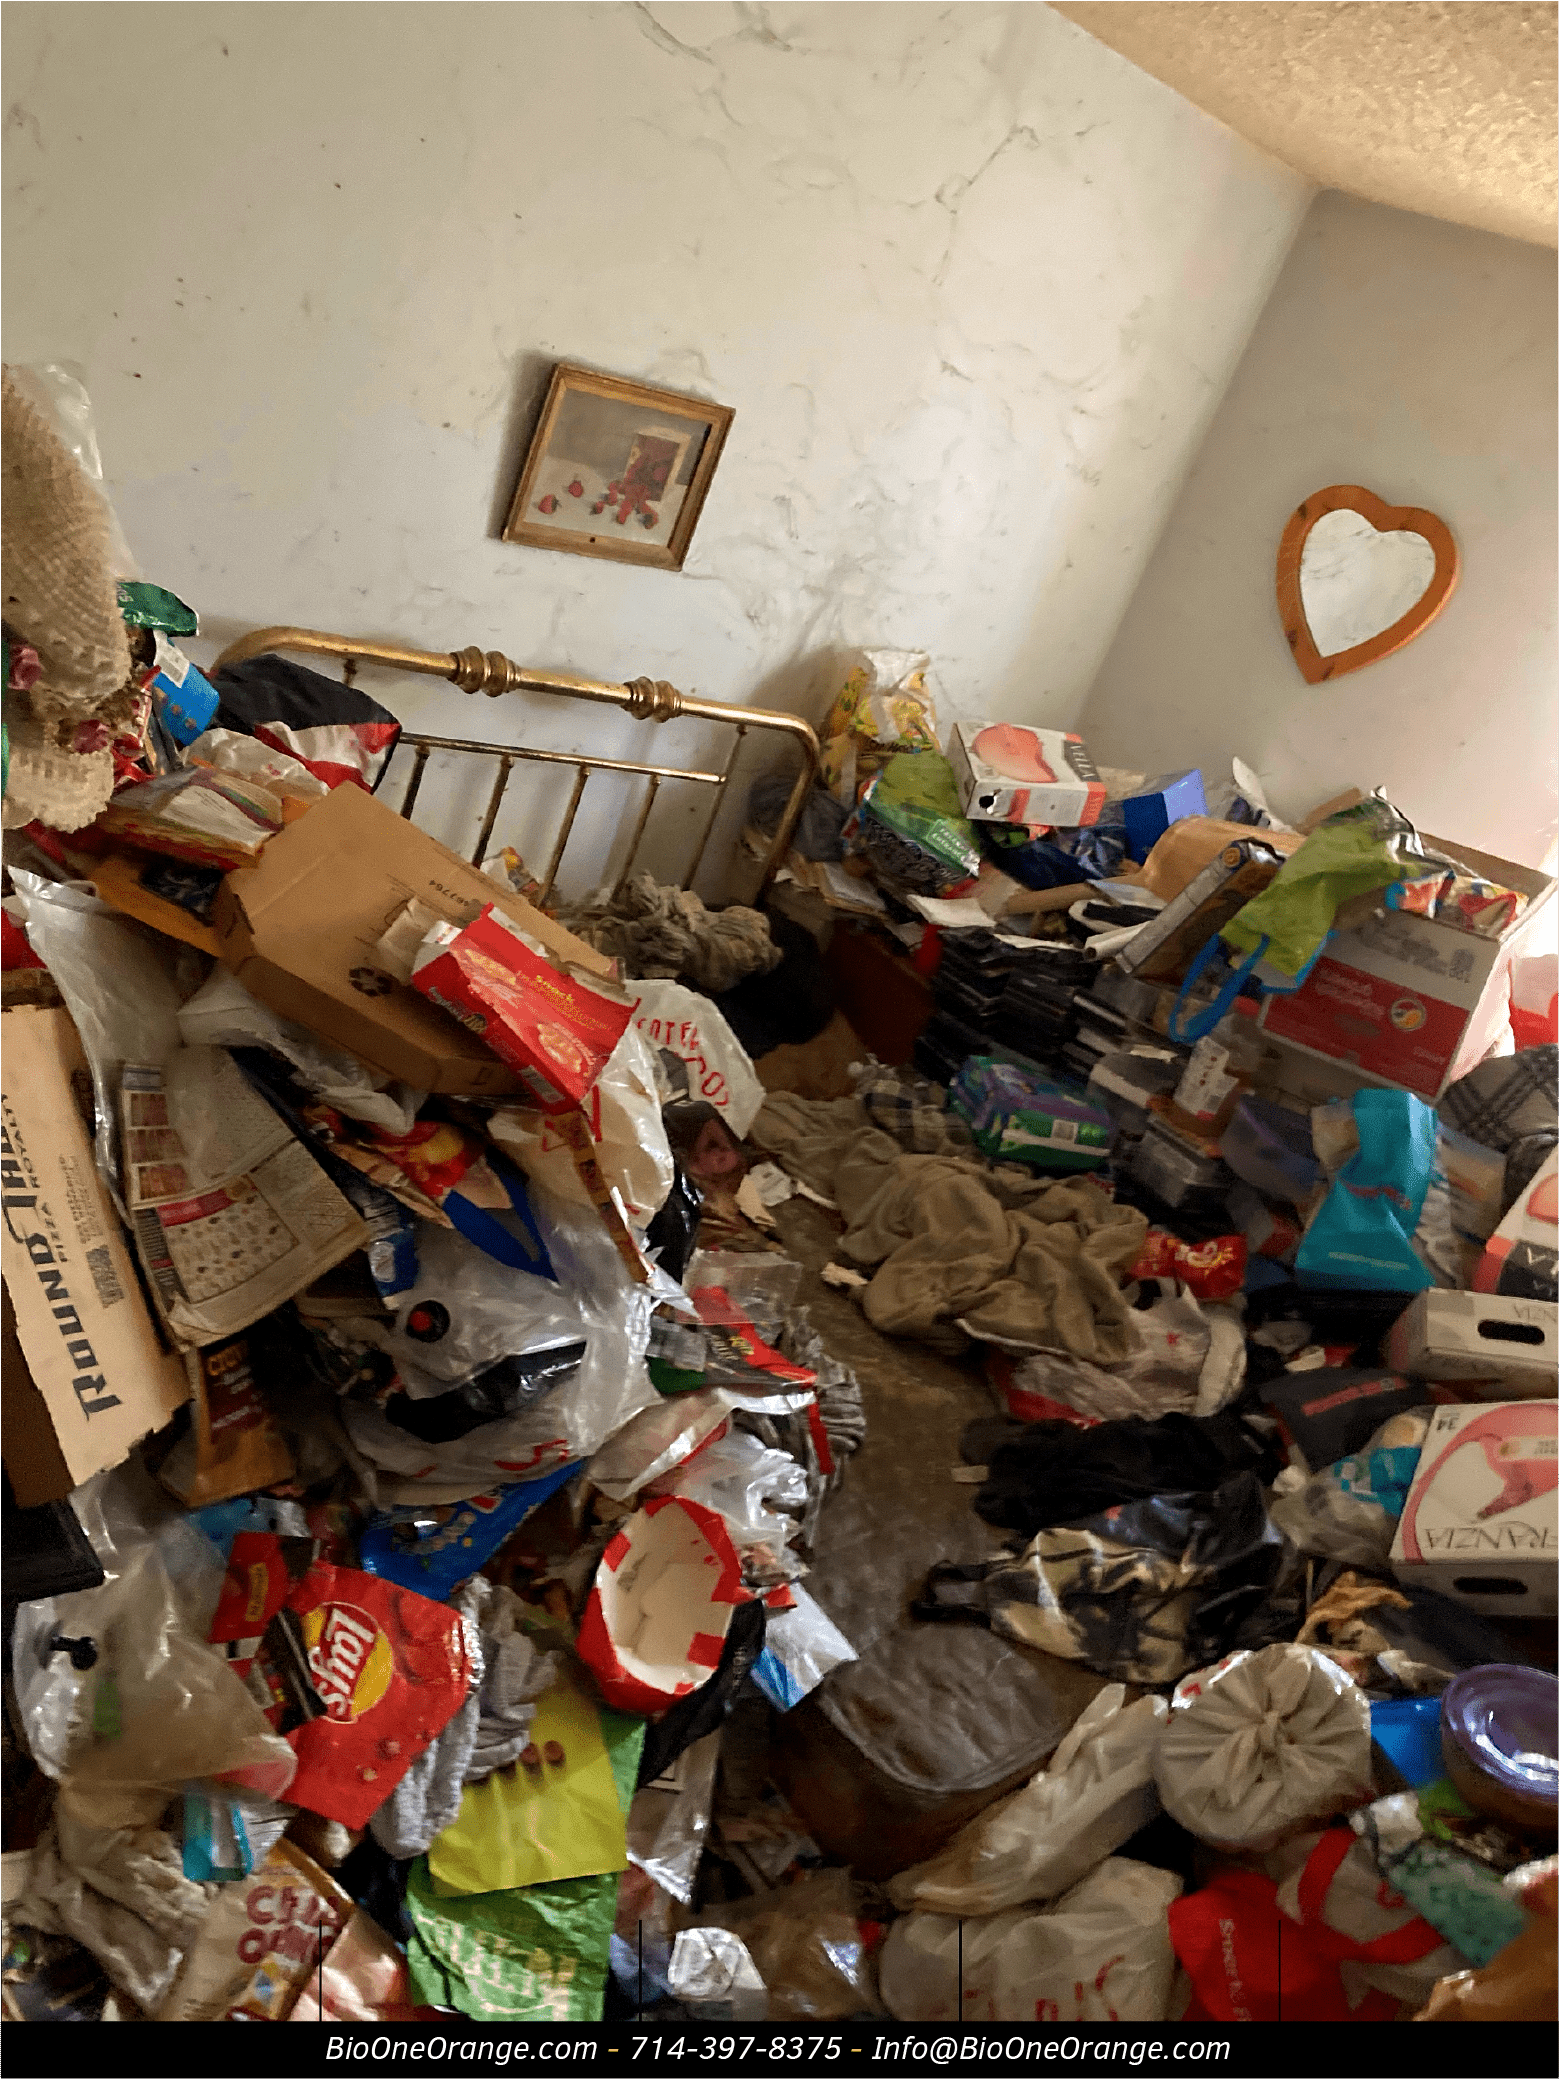 Image shows a bedroom with piles of clutter and debris where mice and rats usually hide.